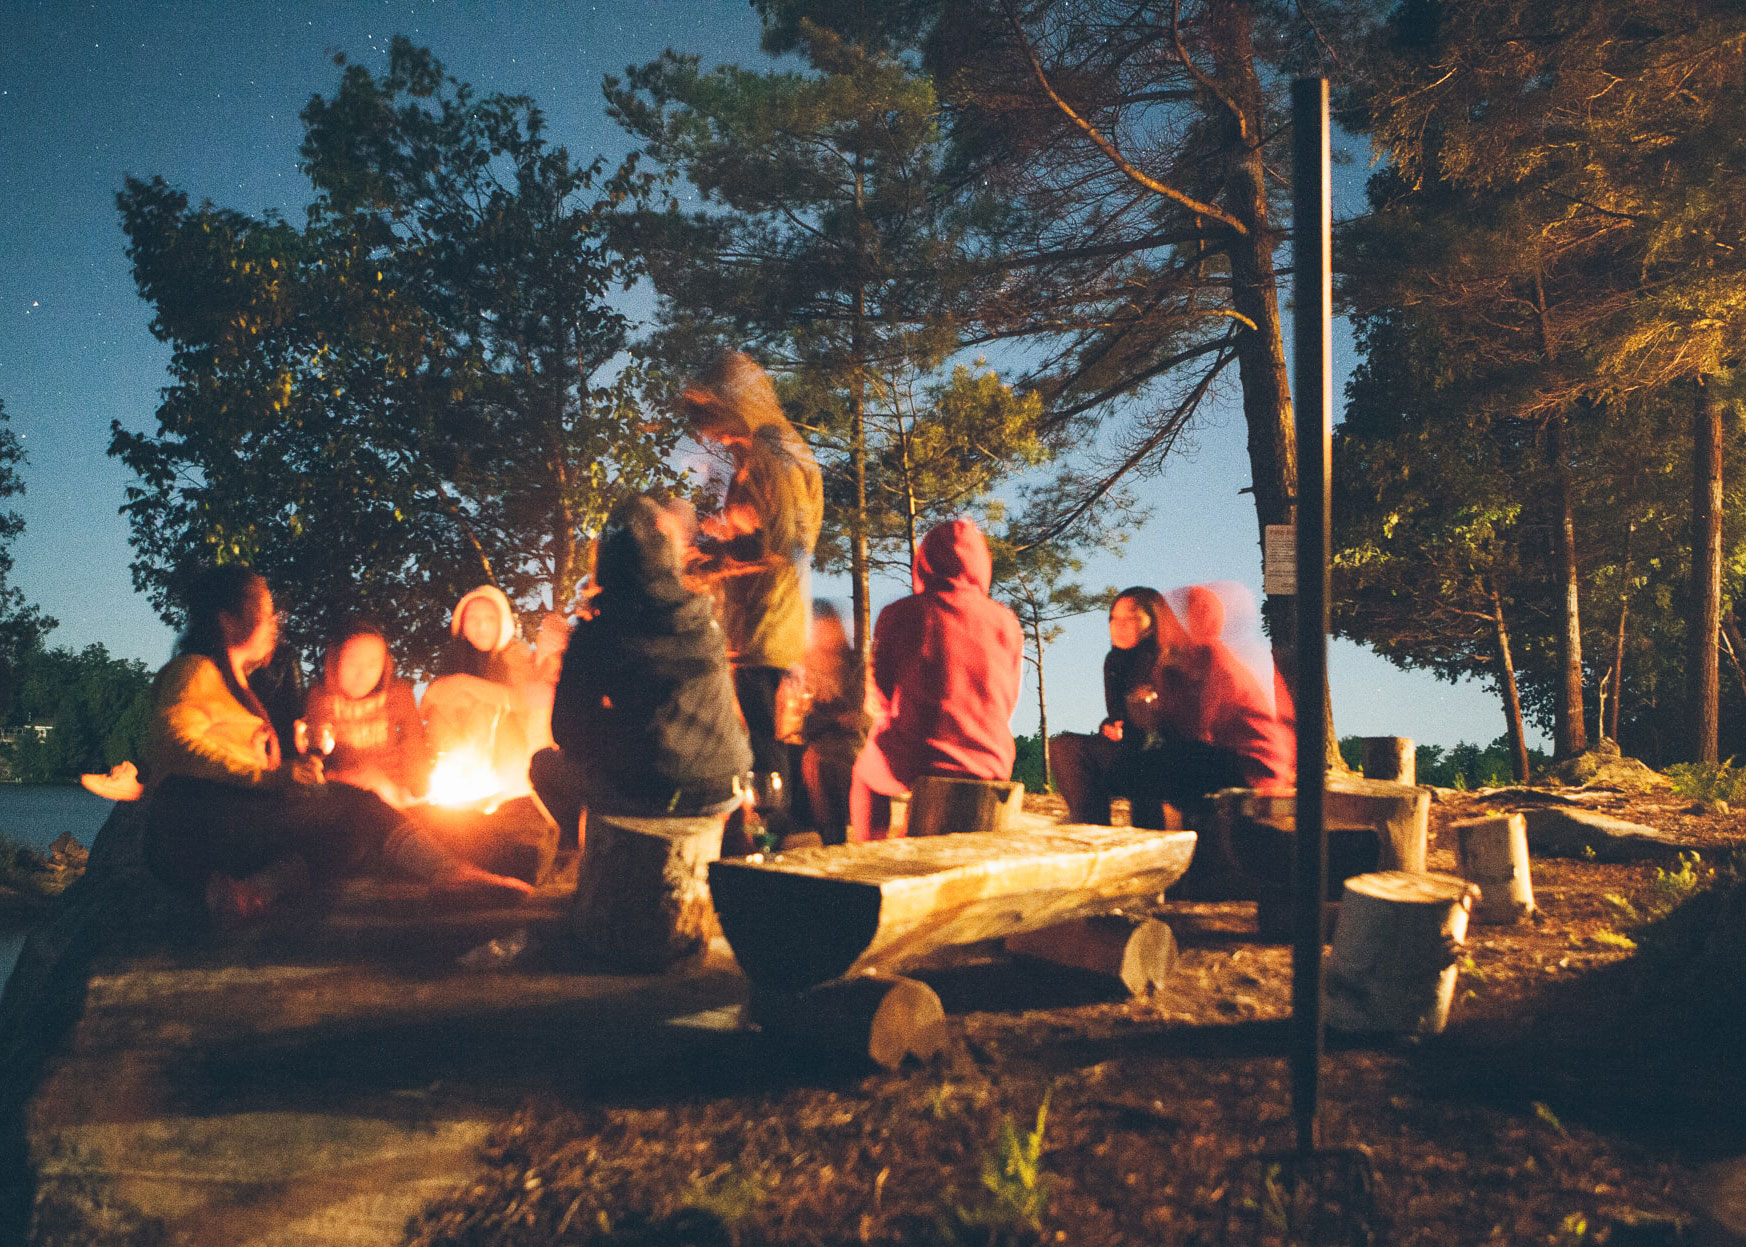 teenagers around a campfire at dusk